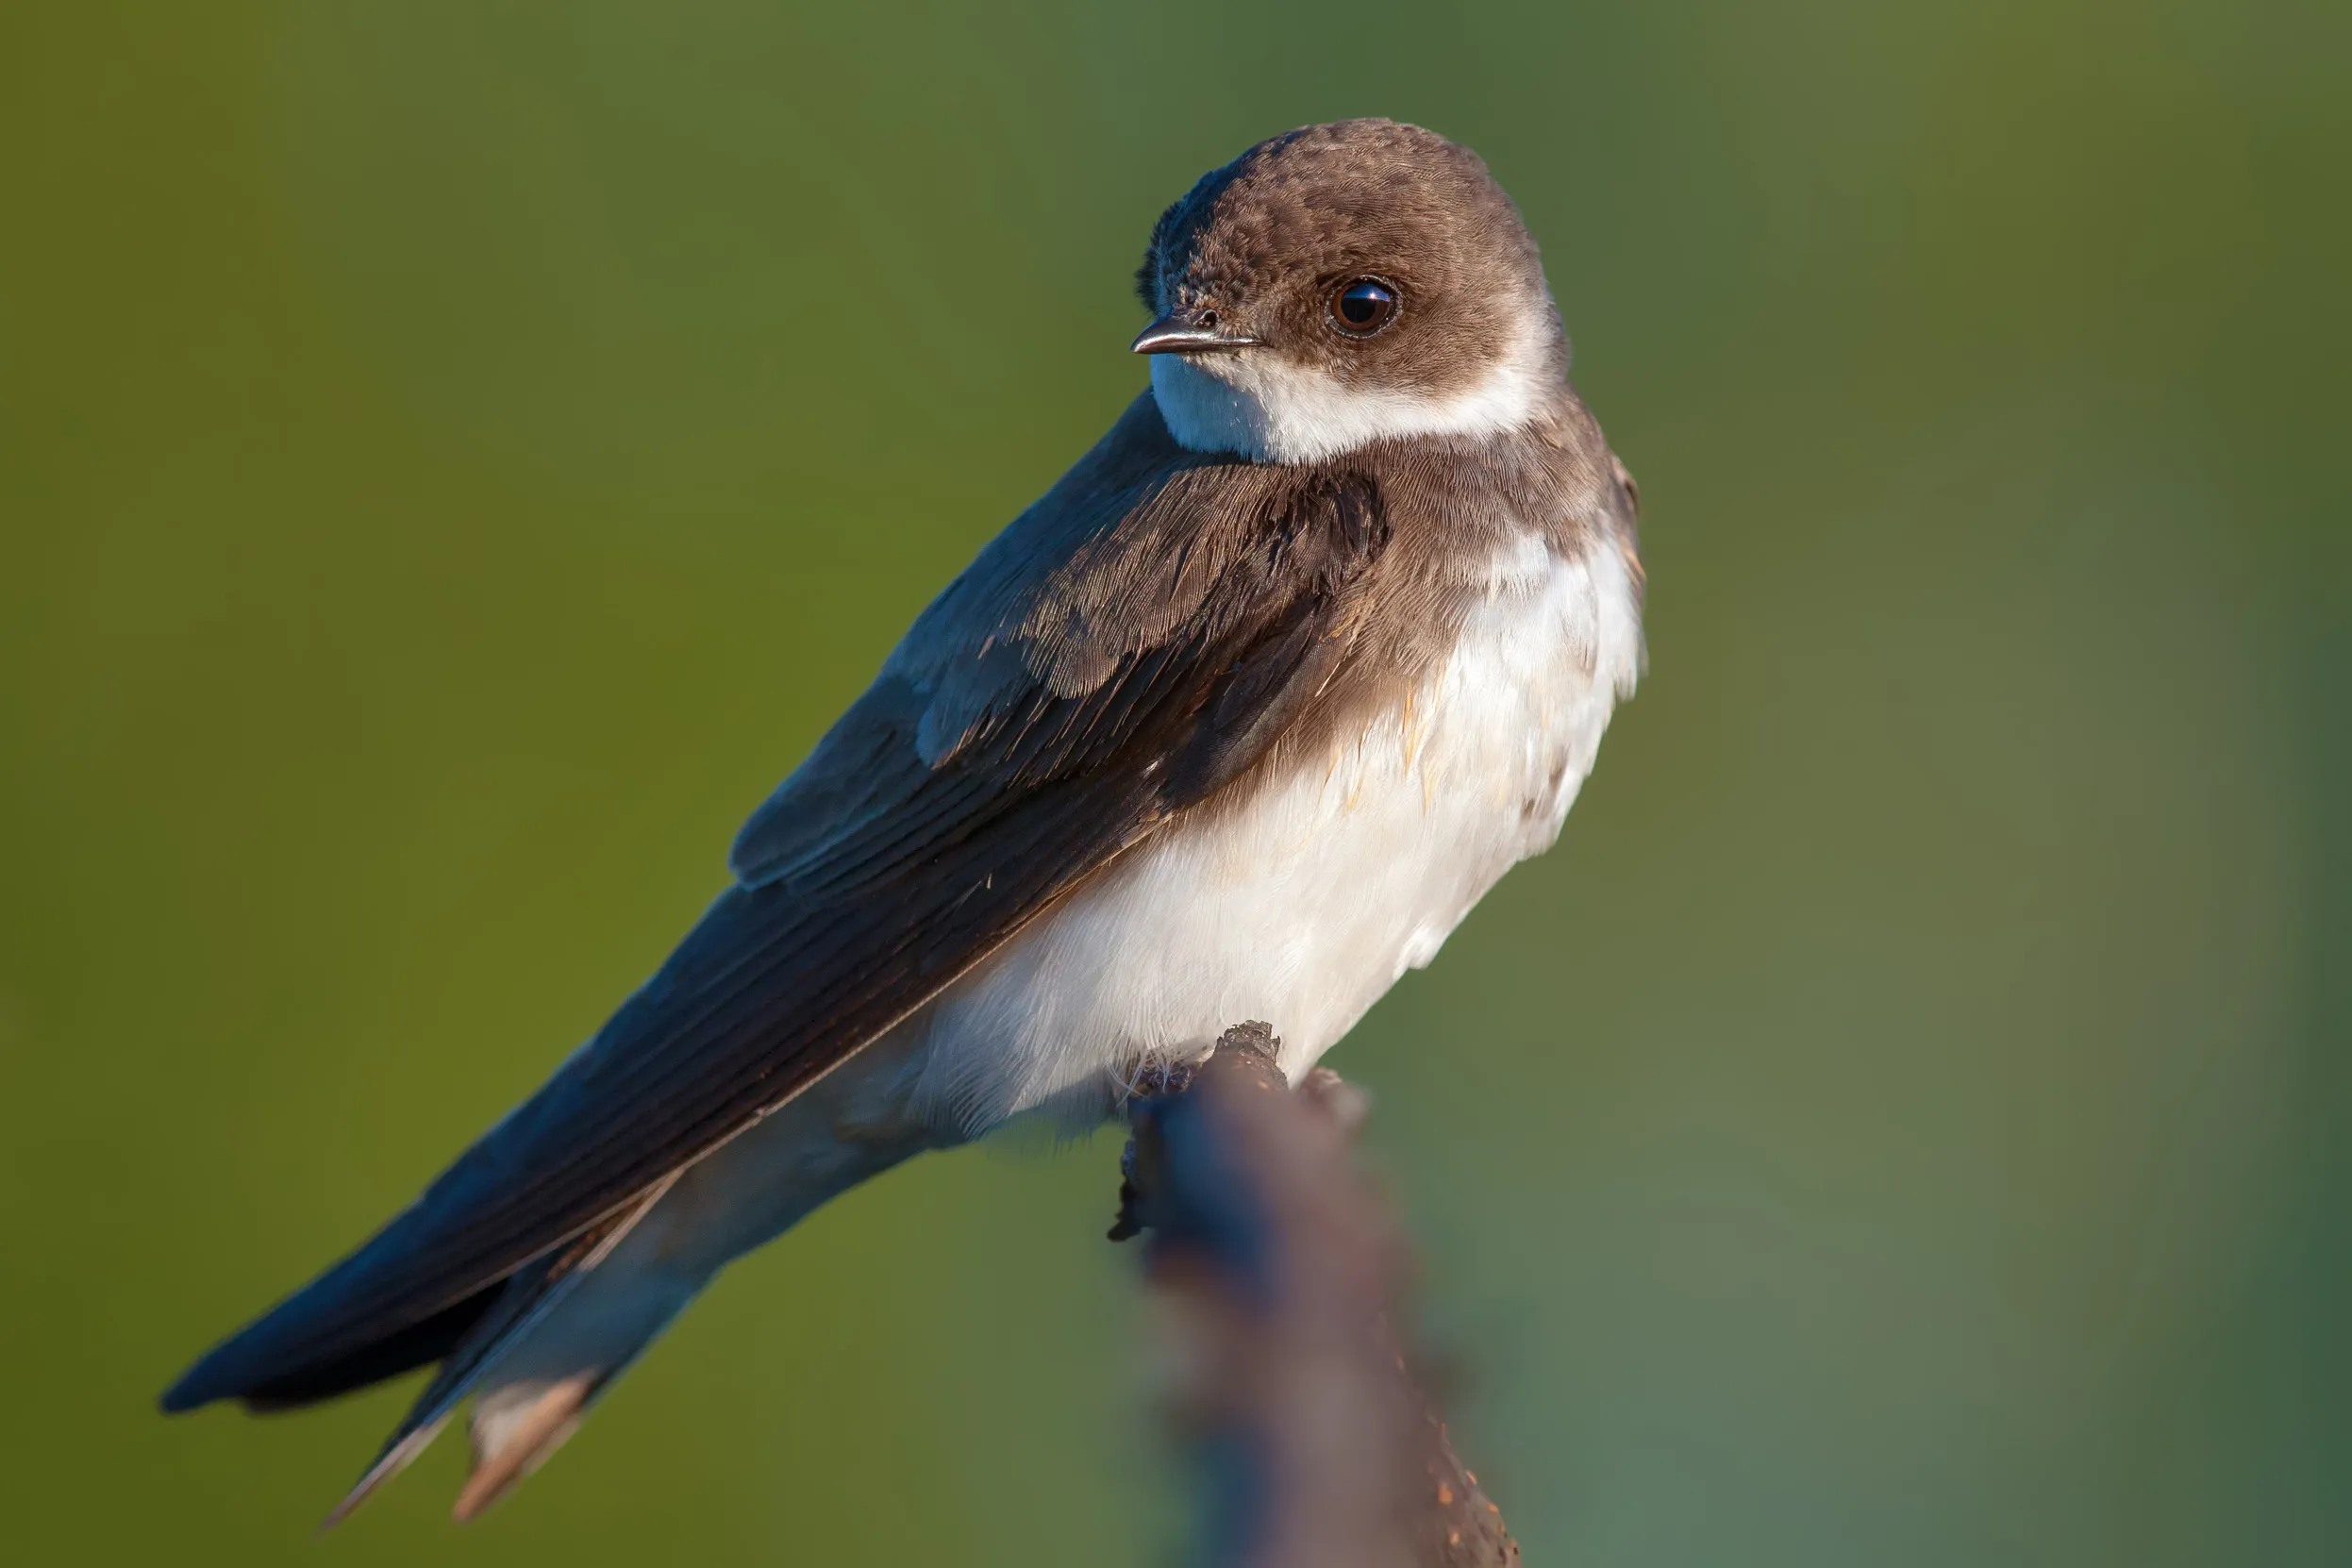 A Sand Martin perched on a blurred branch, looking over it's shoulder.